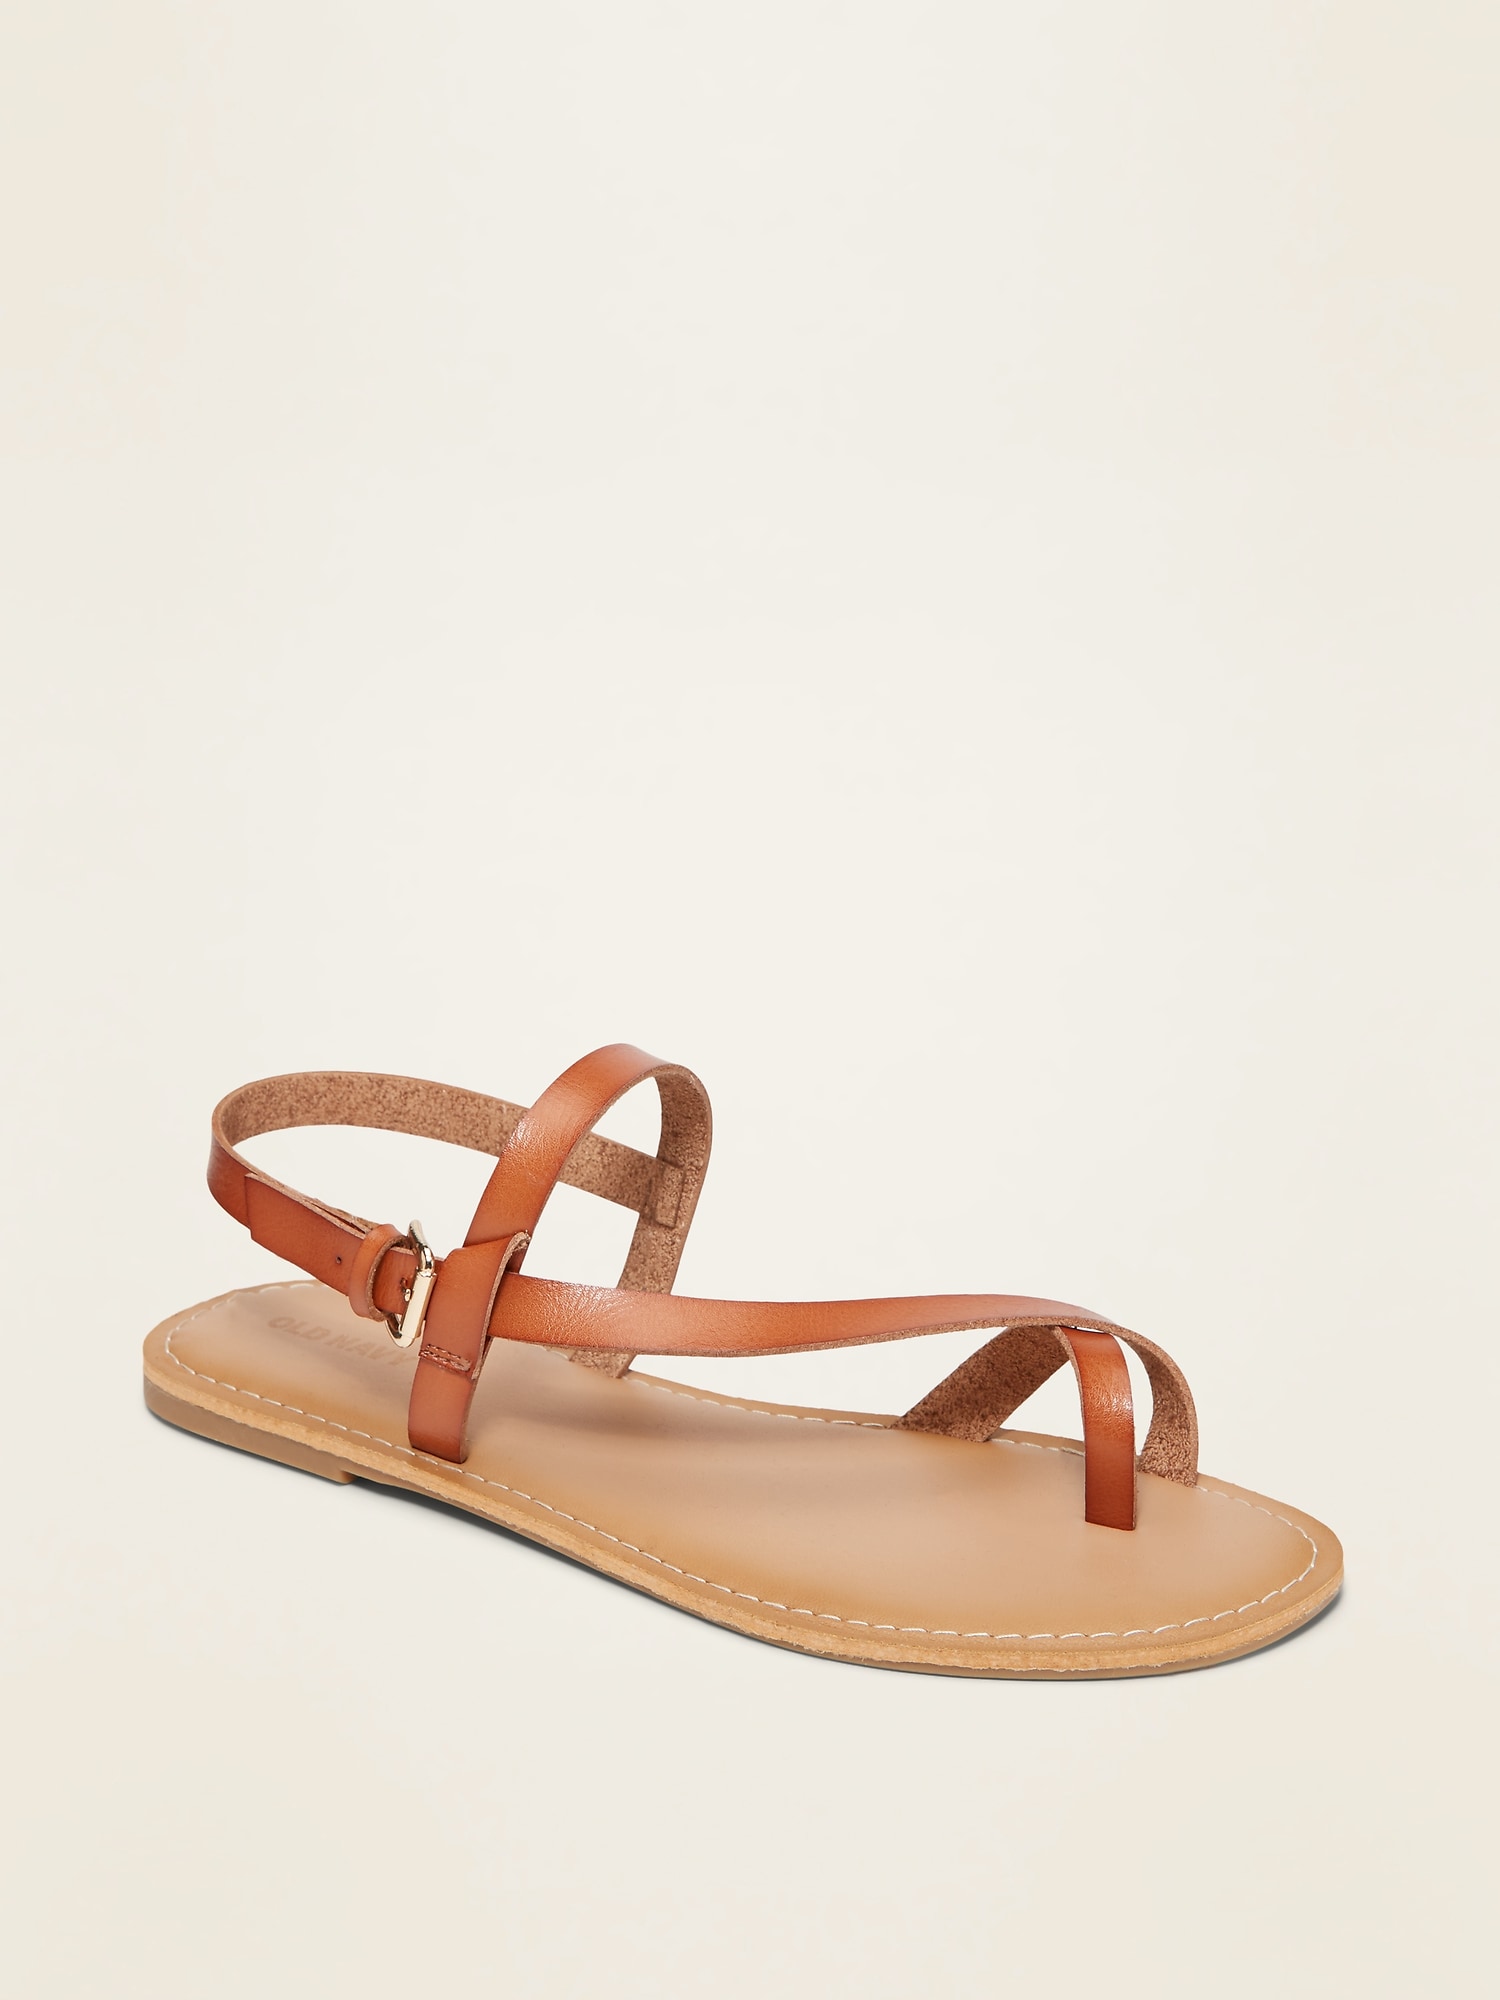 Faux-Leather Asymmetric Cross-Strap Sandals for Women | Old Navy